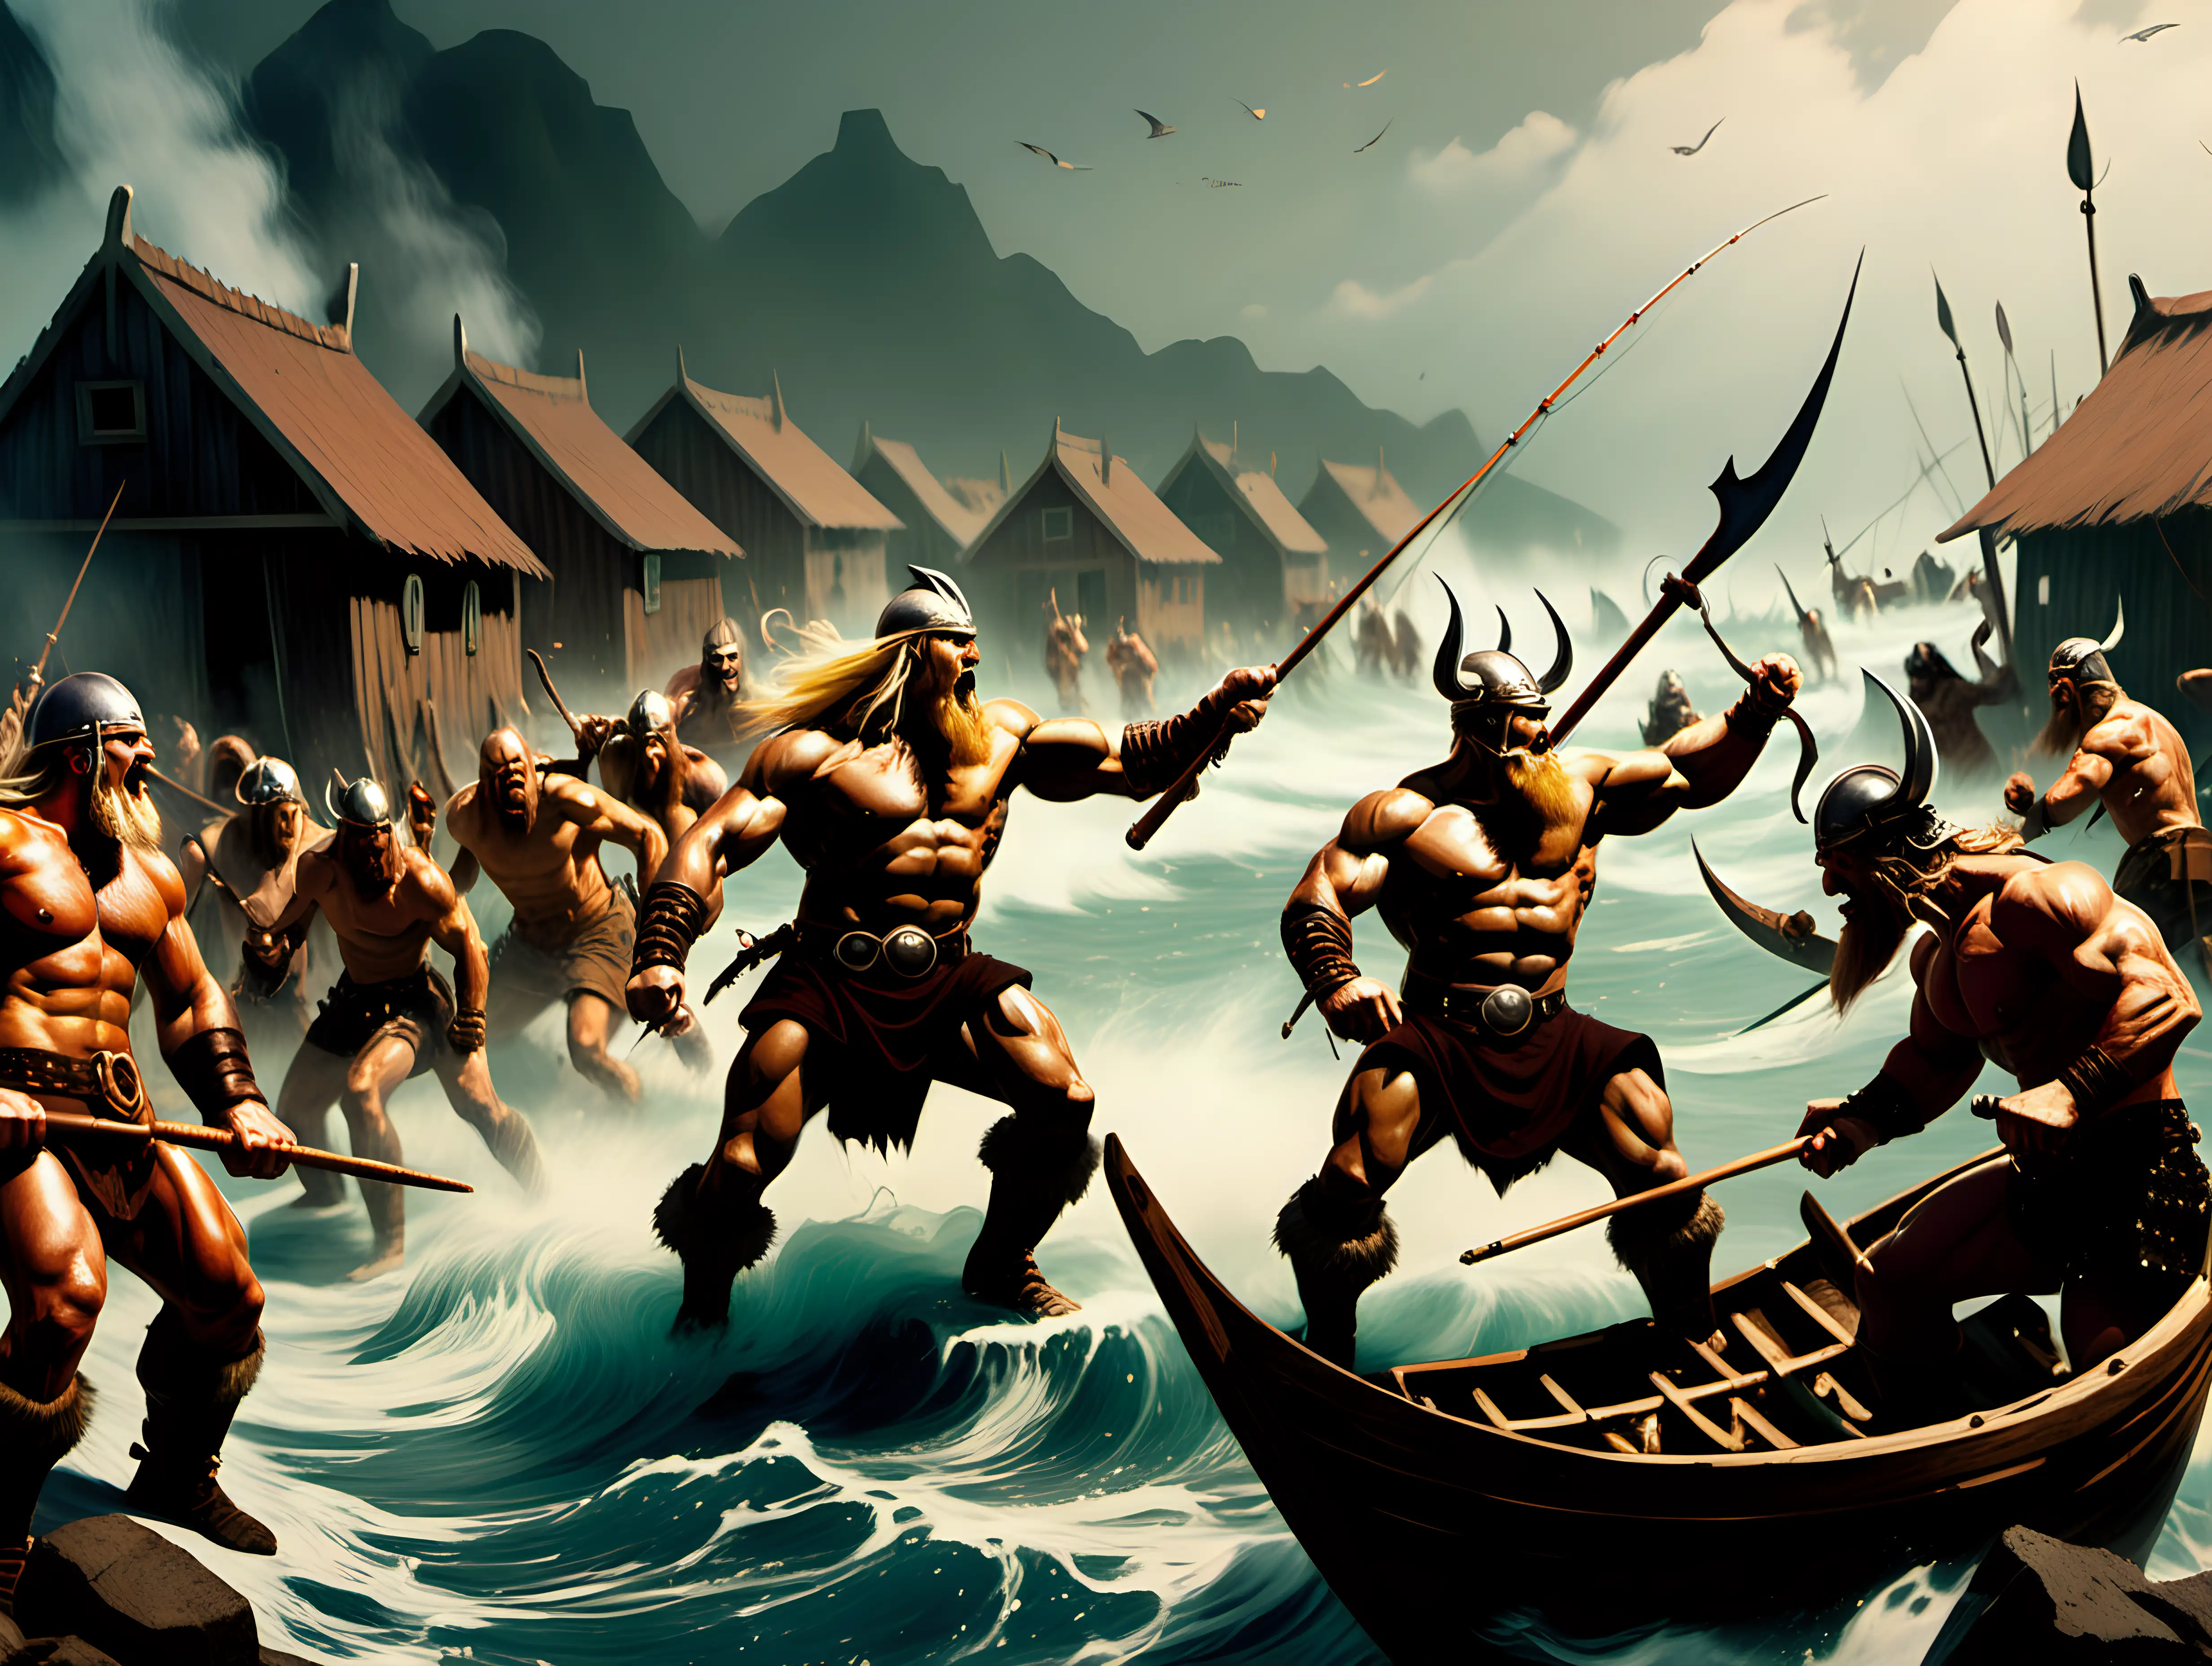 Epic Battle of Vikings and Barbarians in a Coastal Village